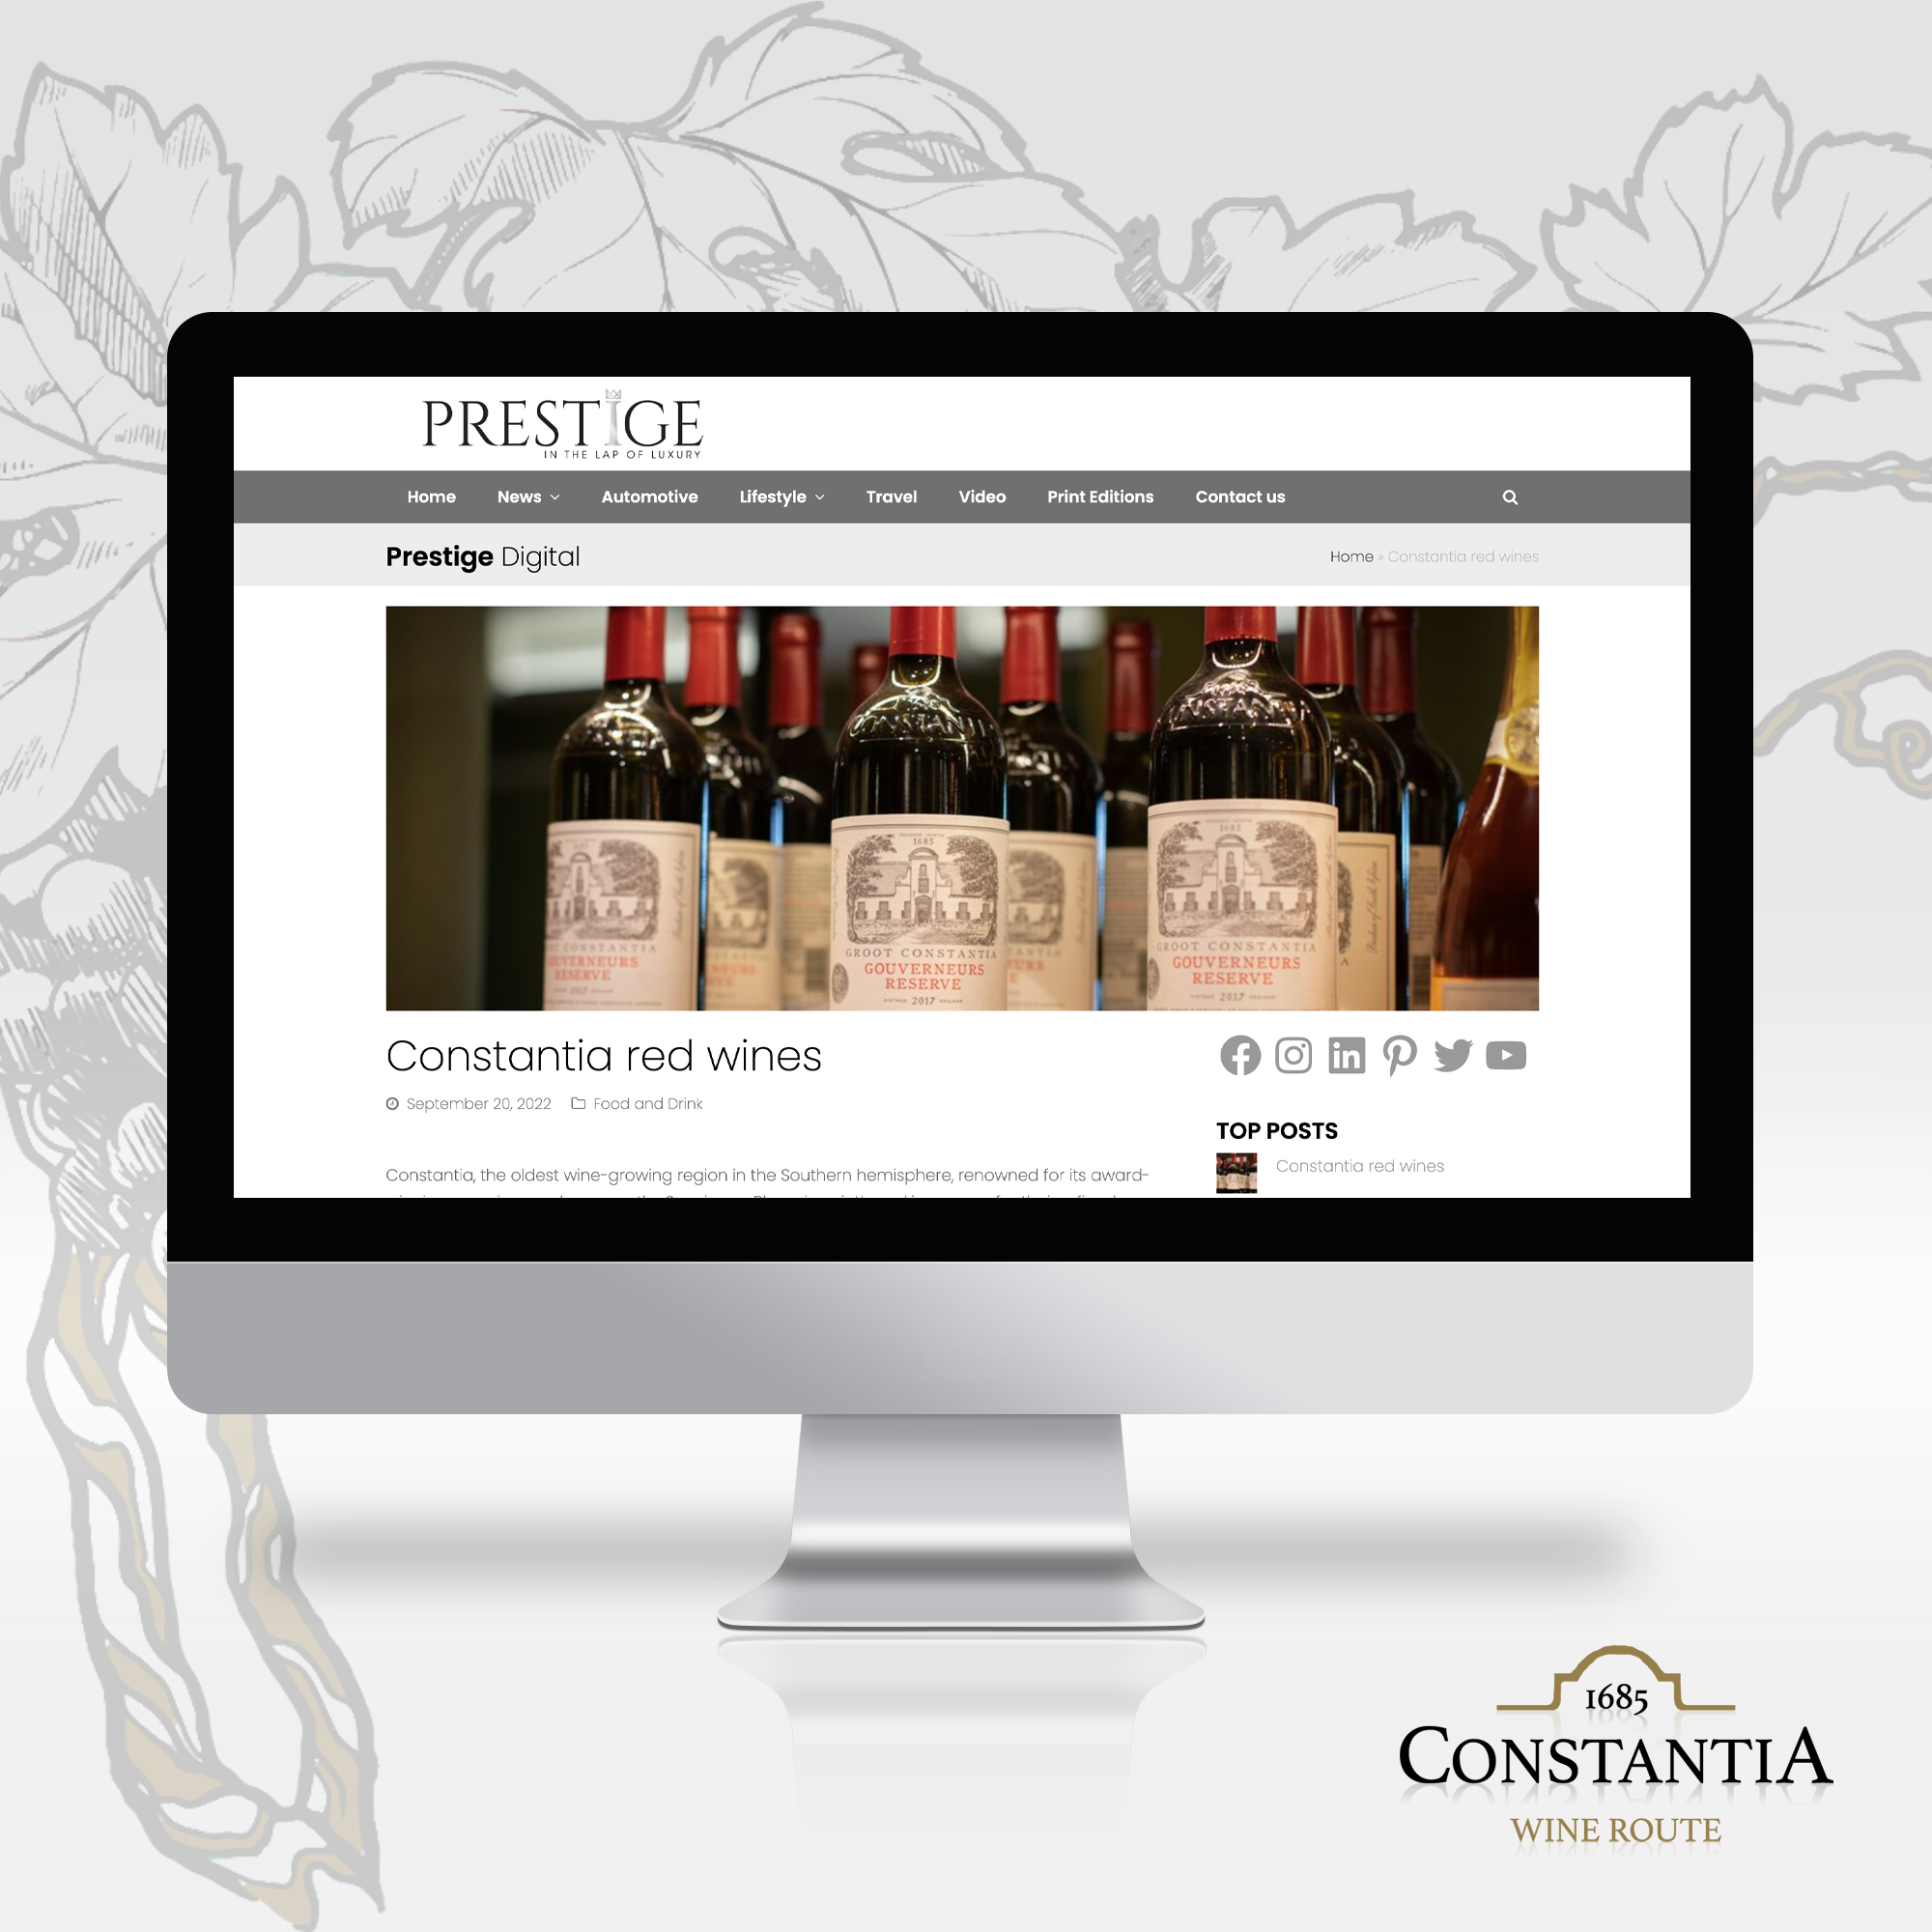 Featured image for “Constantia Red Wines”